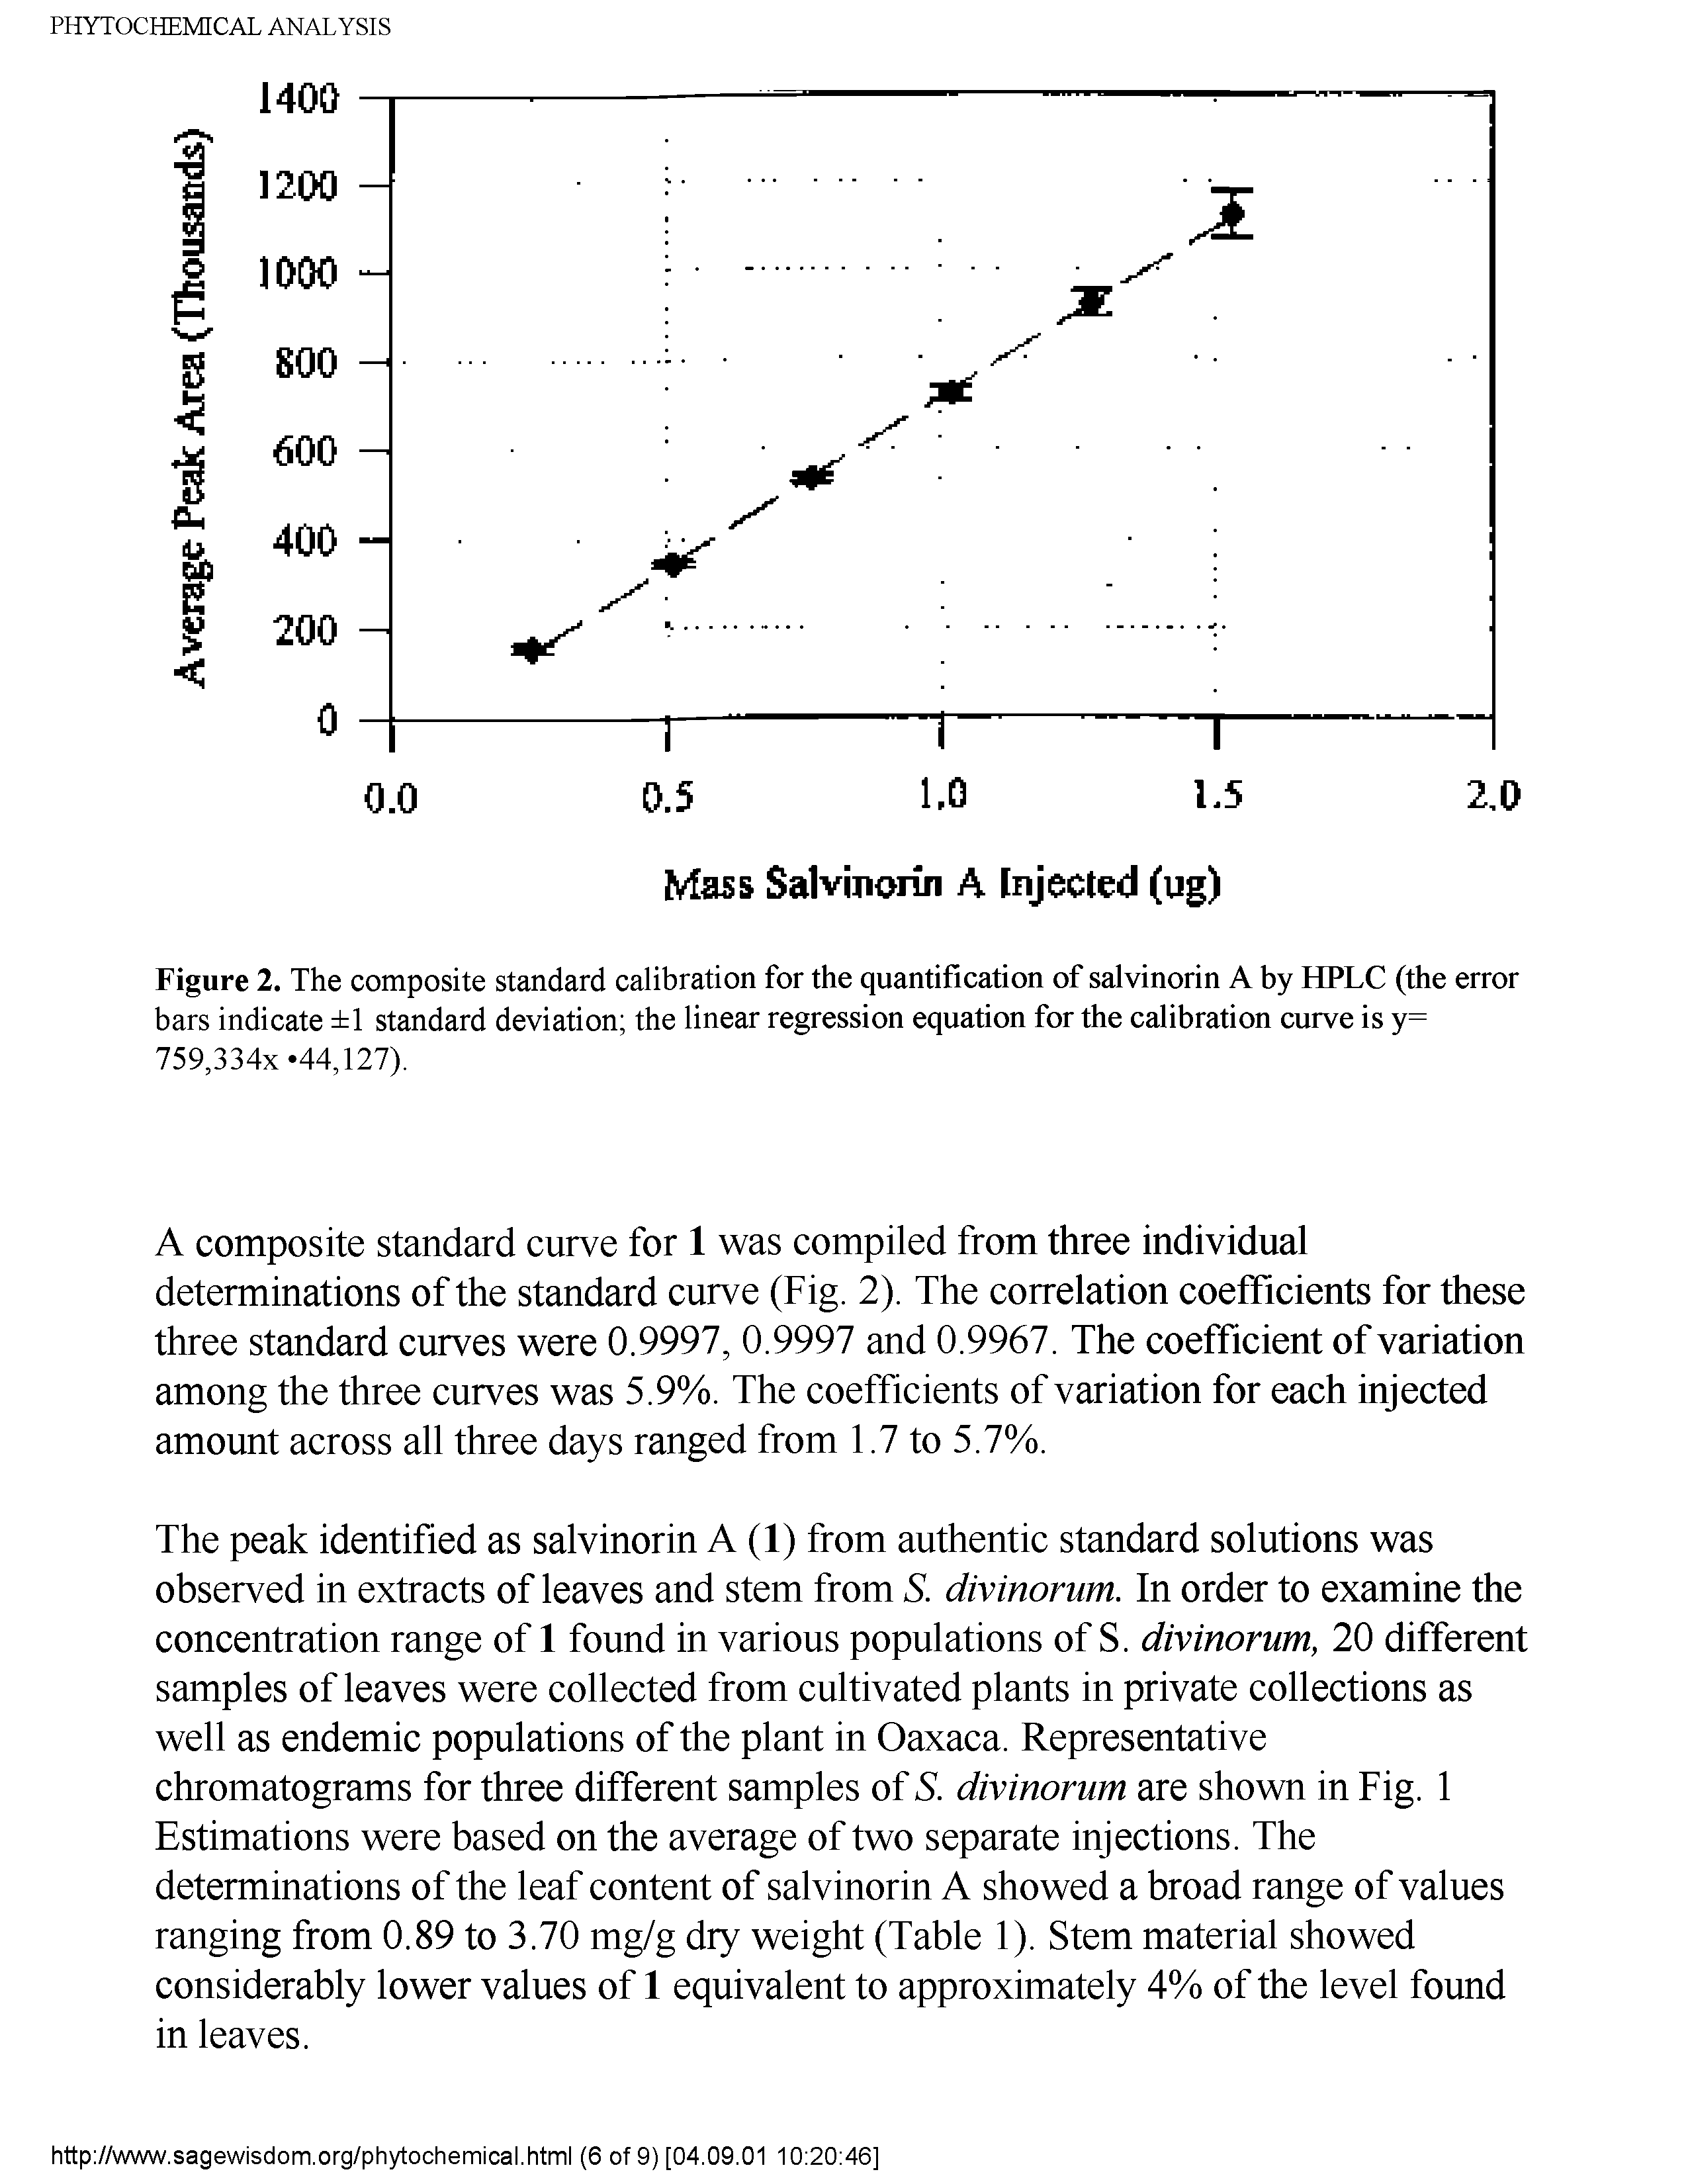 Figure 2. The composite standard calibration for the quantification of salvinorin A by HPLC (the error bars indicate 1 standard deviation the linear regression equation for the calibration curve is y= 759,334x 44,127).